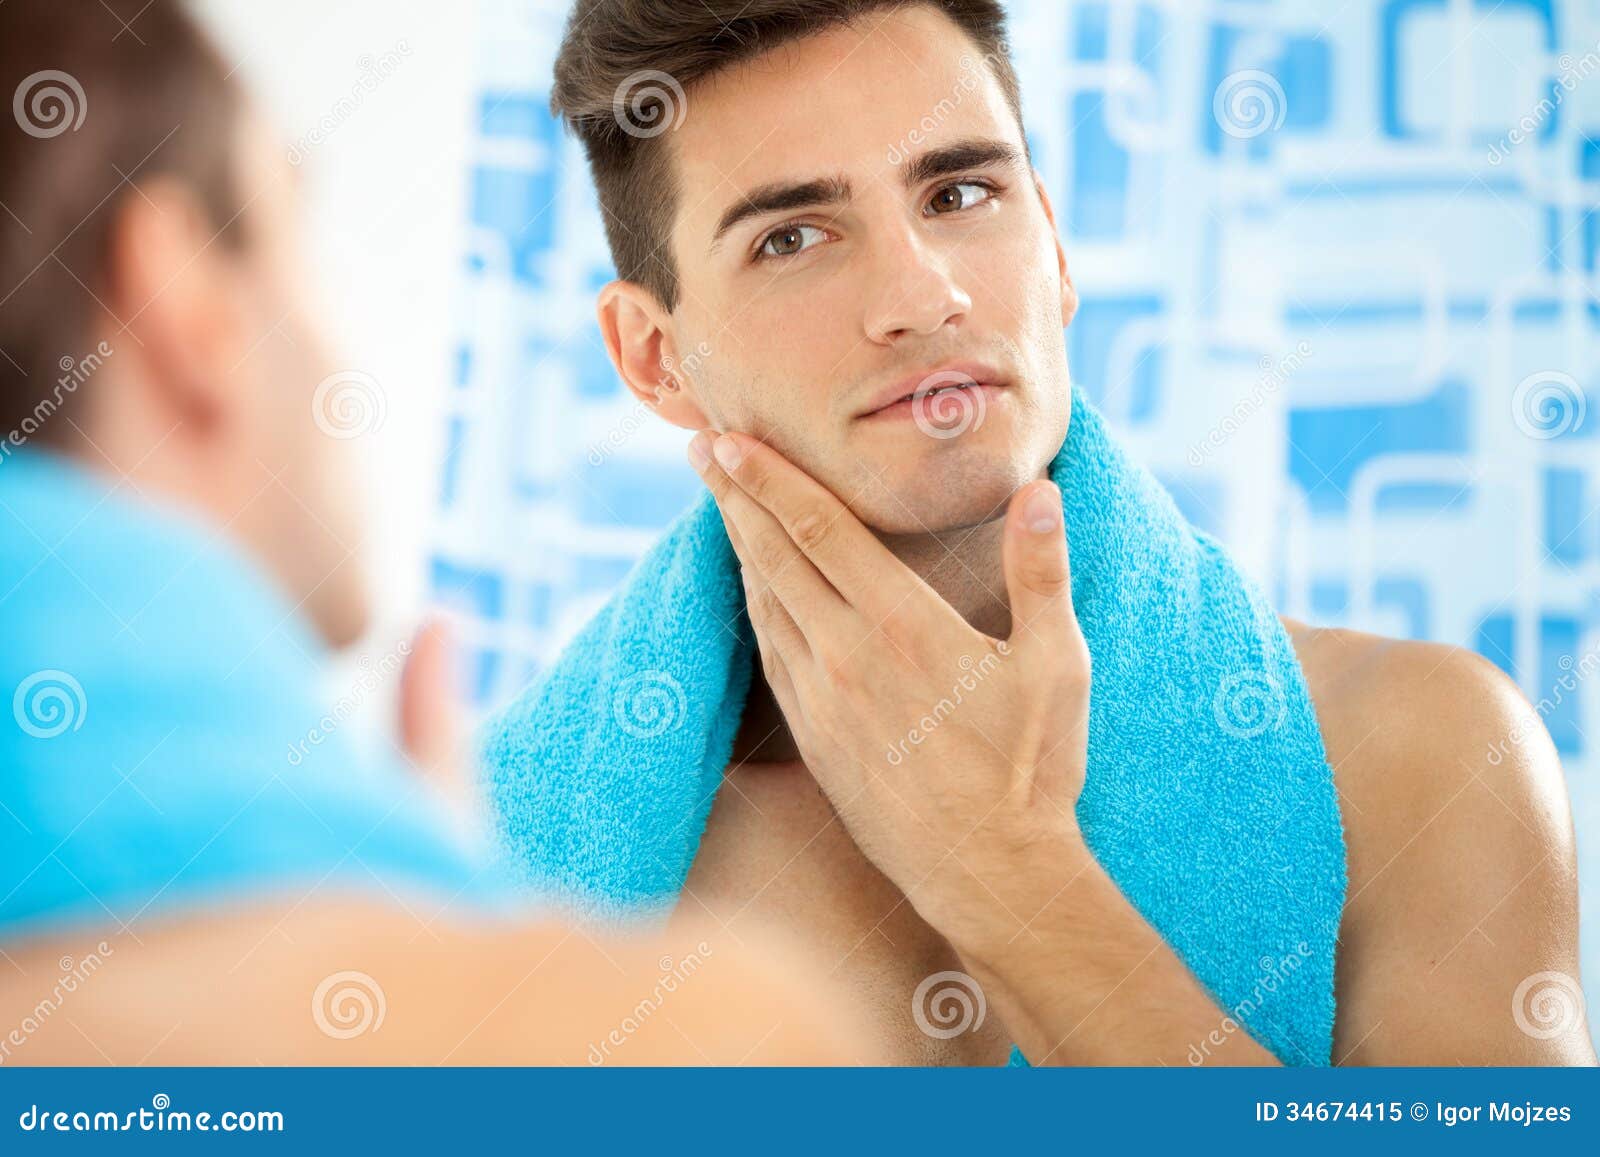 man touching his face after shaving